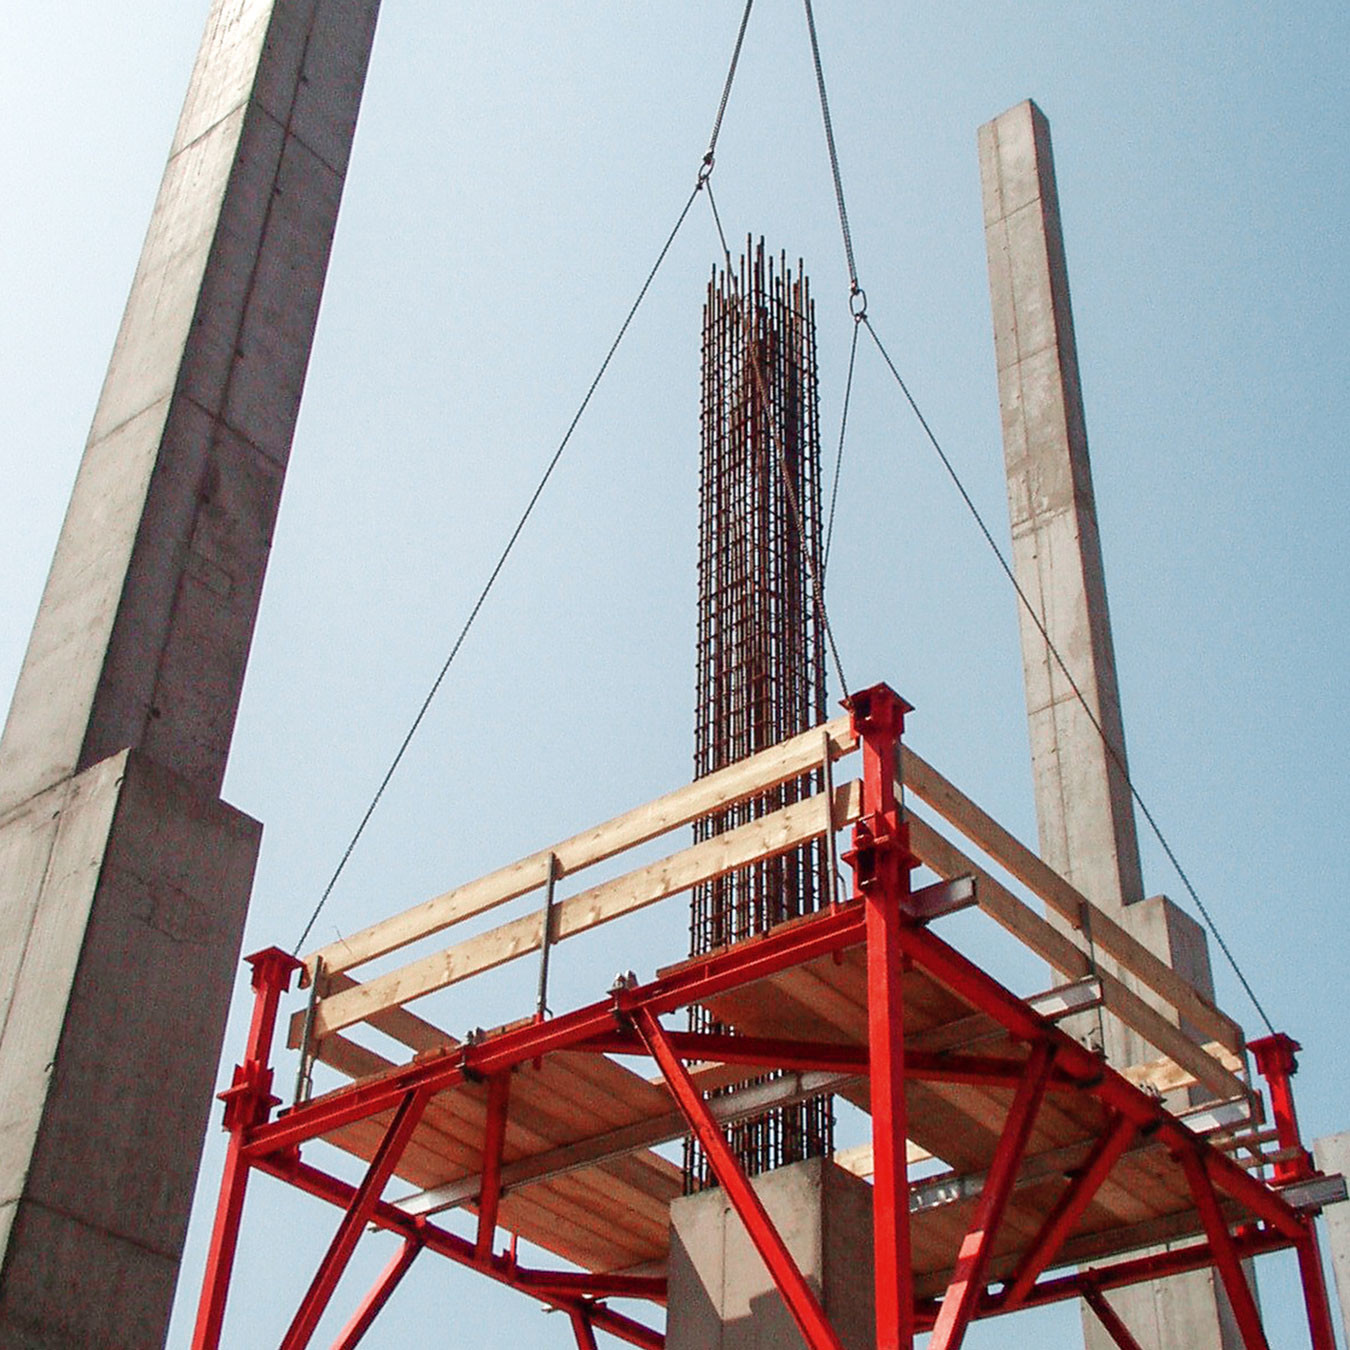 Shoring tower to support concrete tower construction